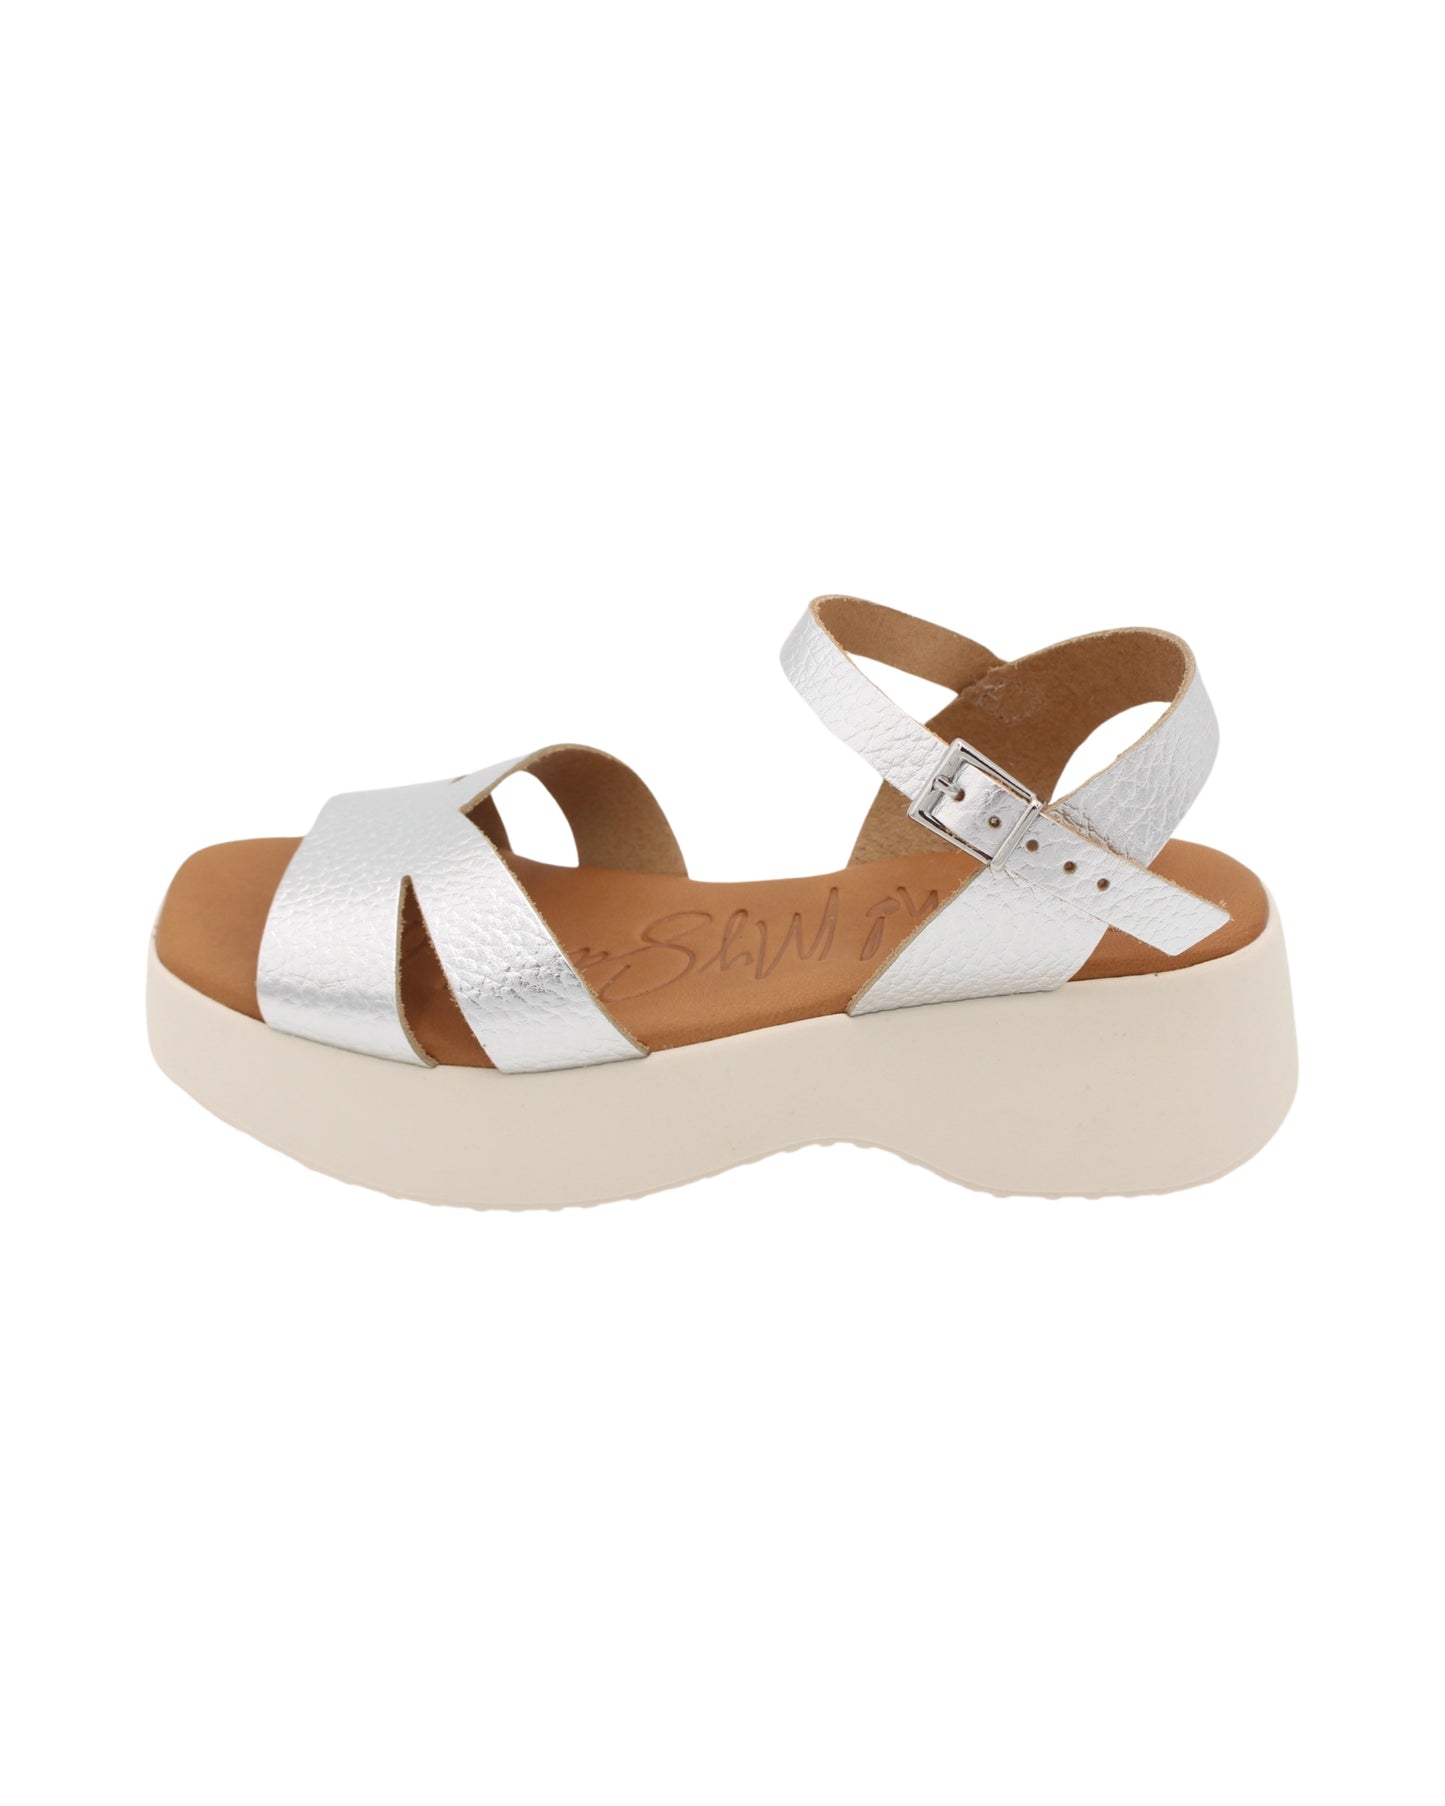 Oh! My Sandals - Ladies Shoes Silver (2115)